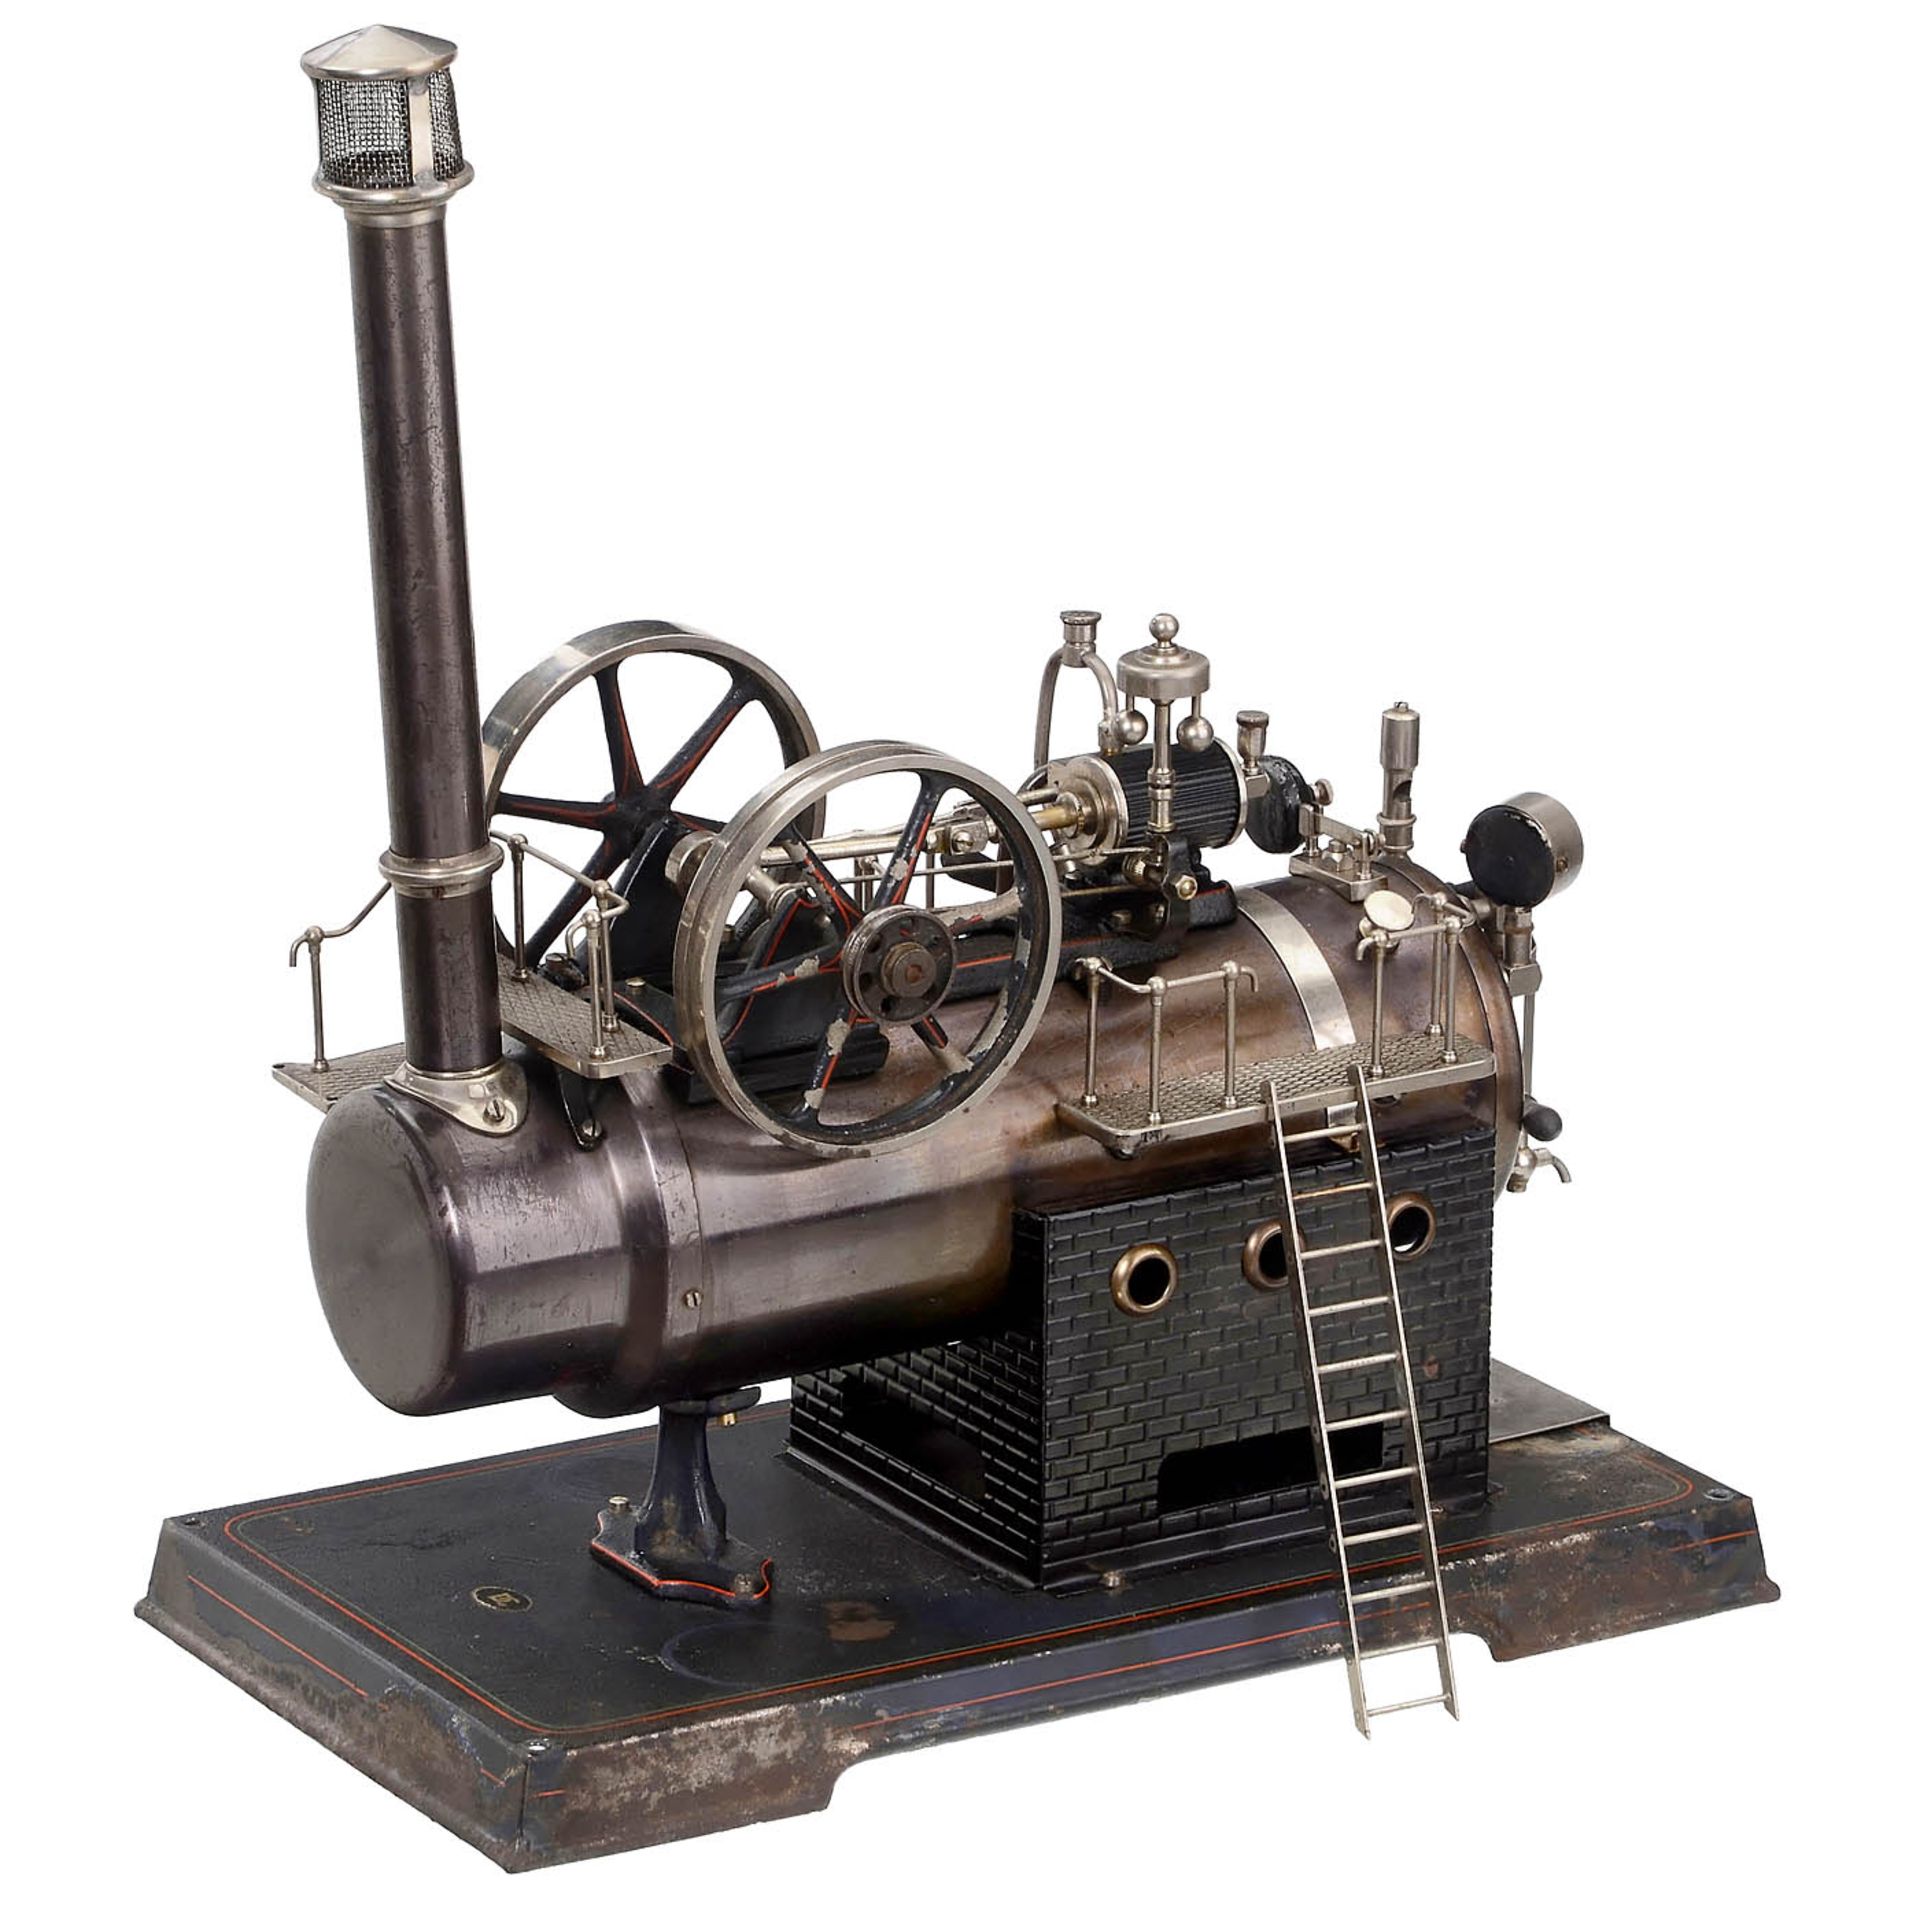 Large Stationary Steam Engine by Doll, c. 1935 - Image 2 of 2